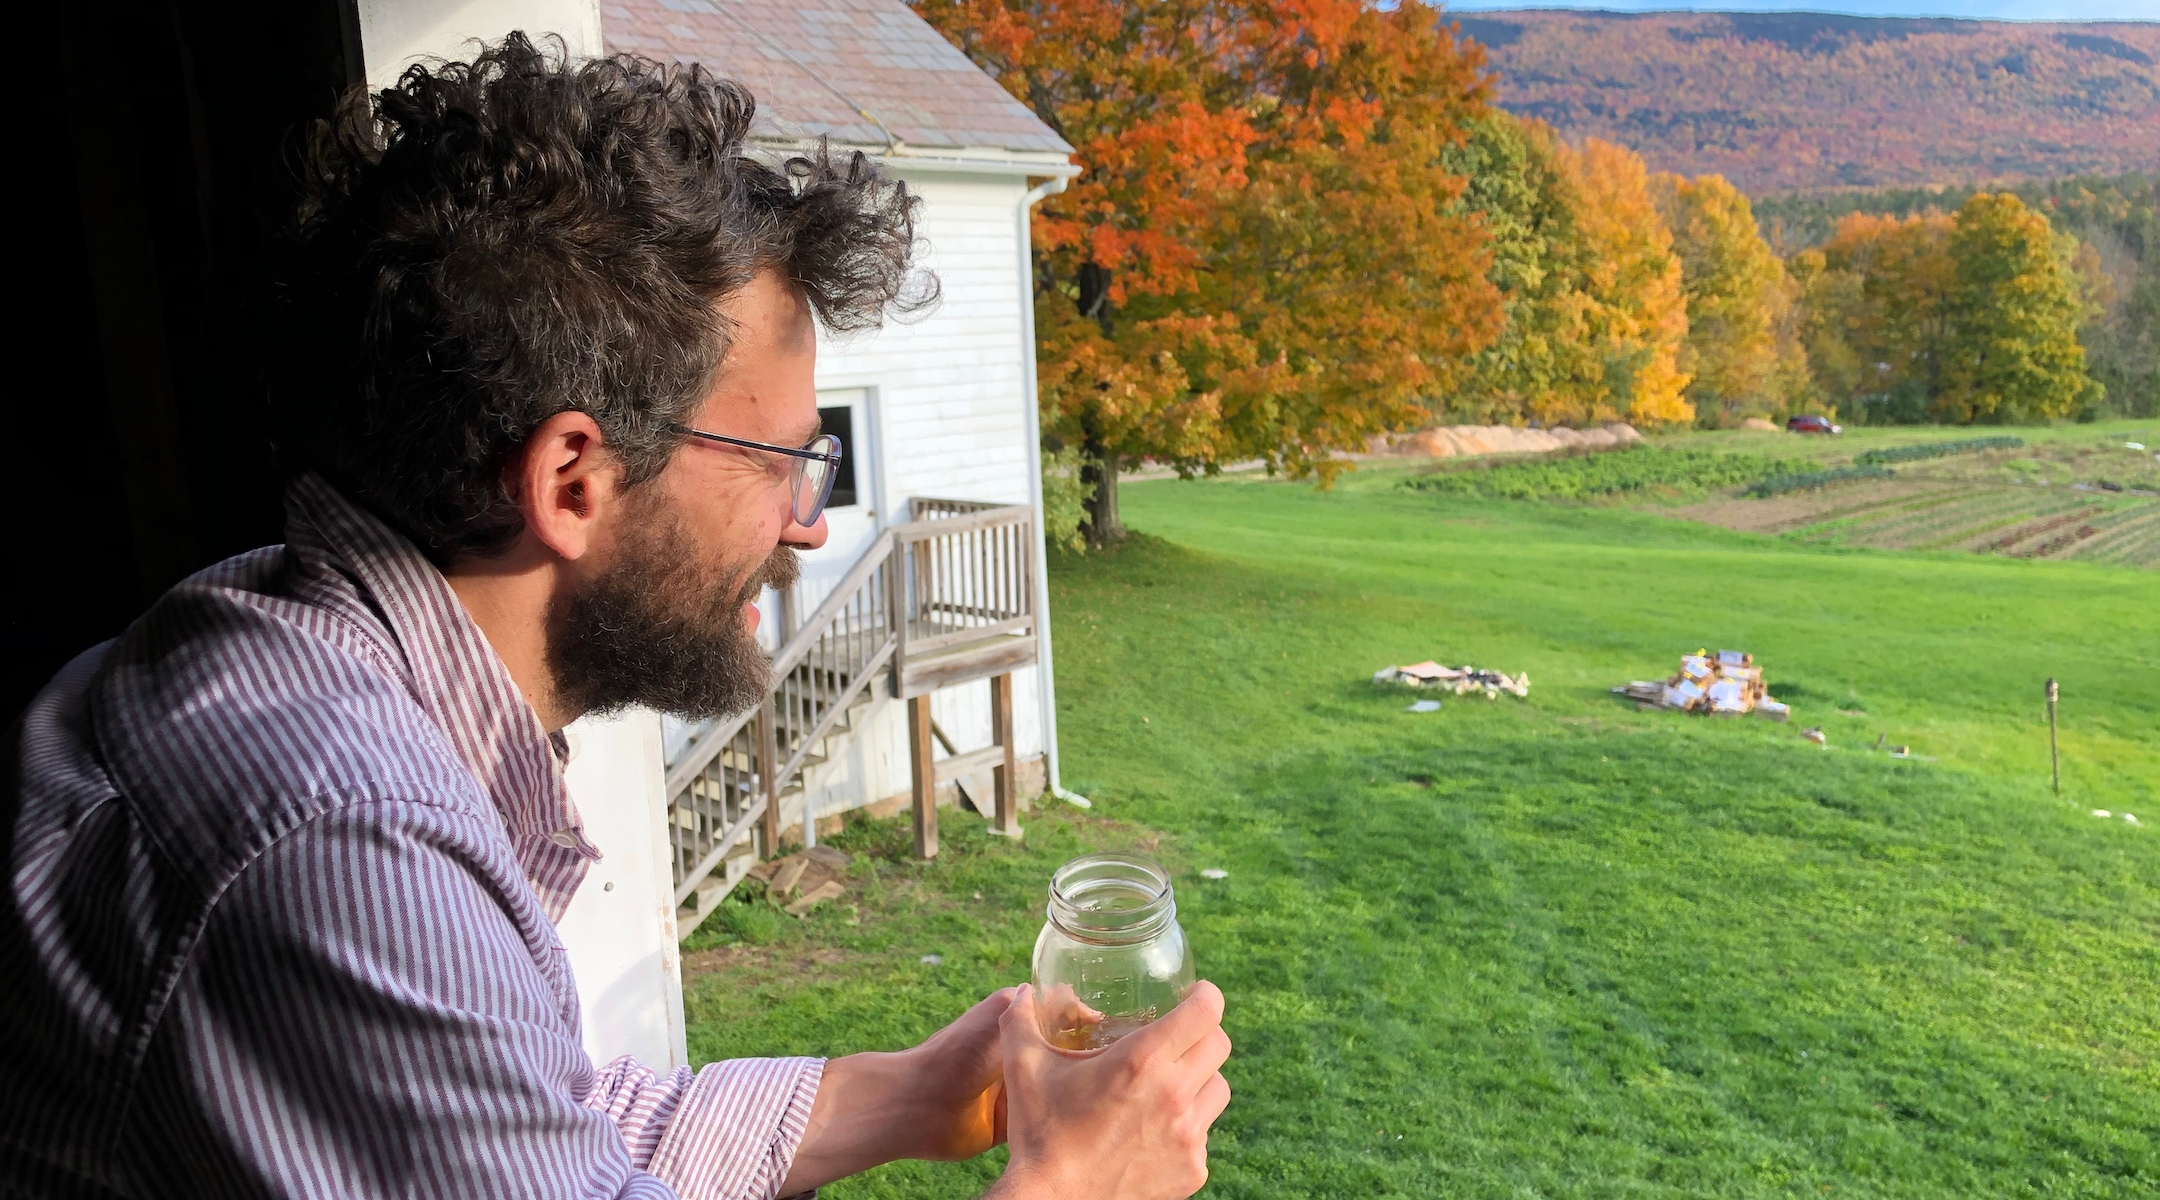 A young man overlooks a farm holding a drink in a mason jar